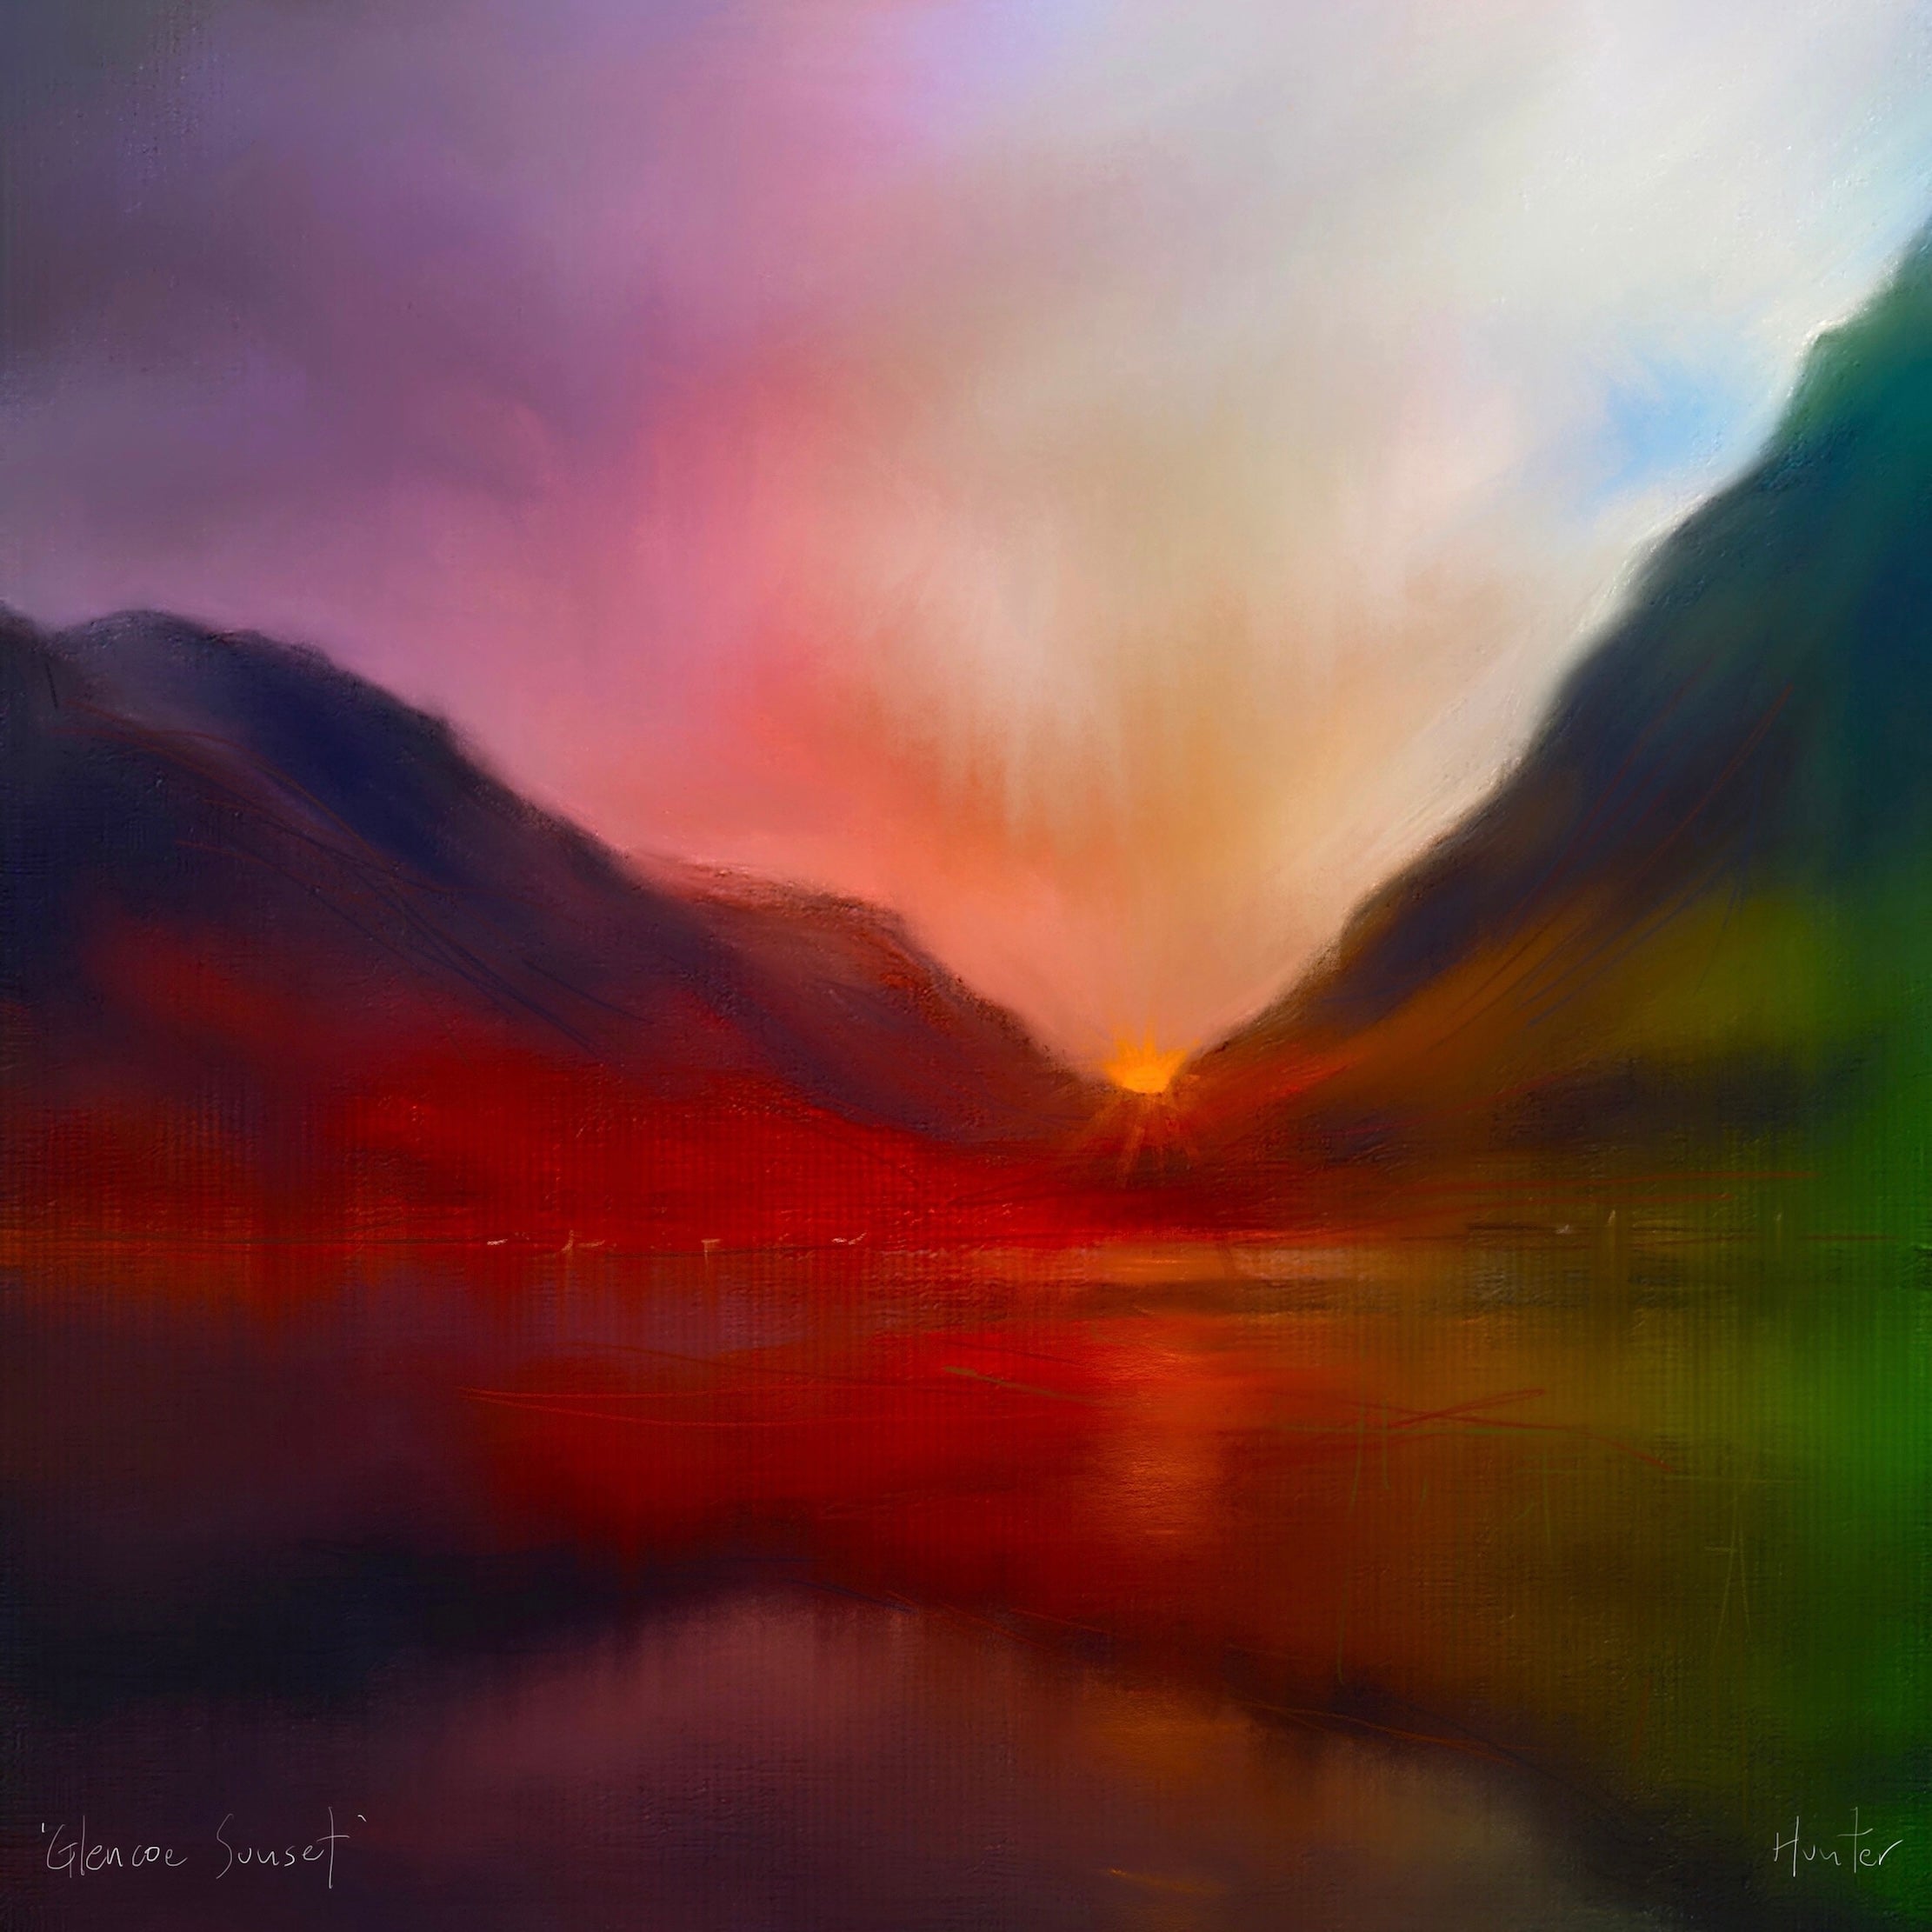 Glencoe Sunset | Scotland In Your Pocket Art Print-Scotland In Your Pocket Framed Prints-Glencoe Art Gallery-Mounted & Cello Bag: 12.5x12.5 cm-Black Frame-Paintings, Prints, Homeware, Art Gifts From Scotland By Scottish Artist Kevin Hunter